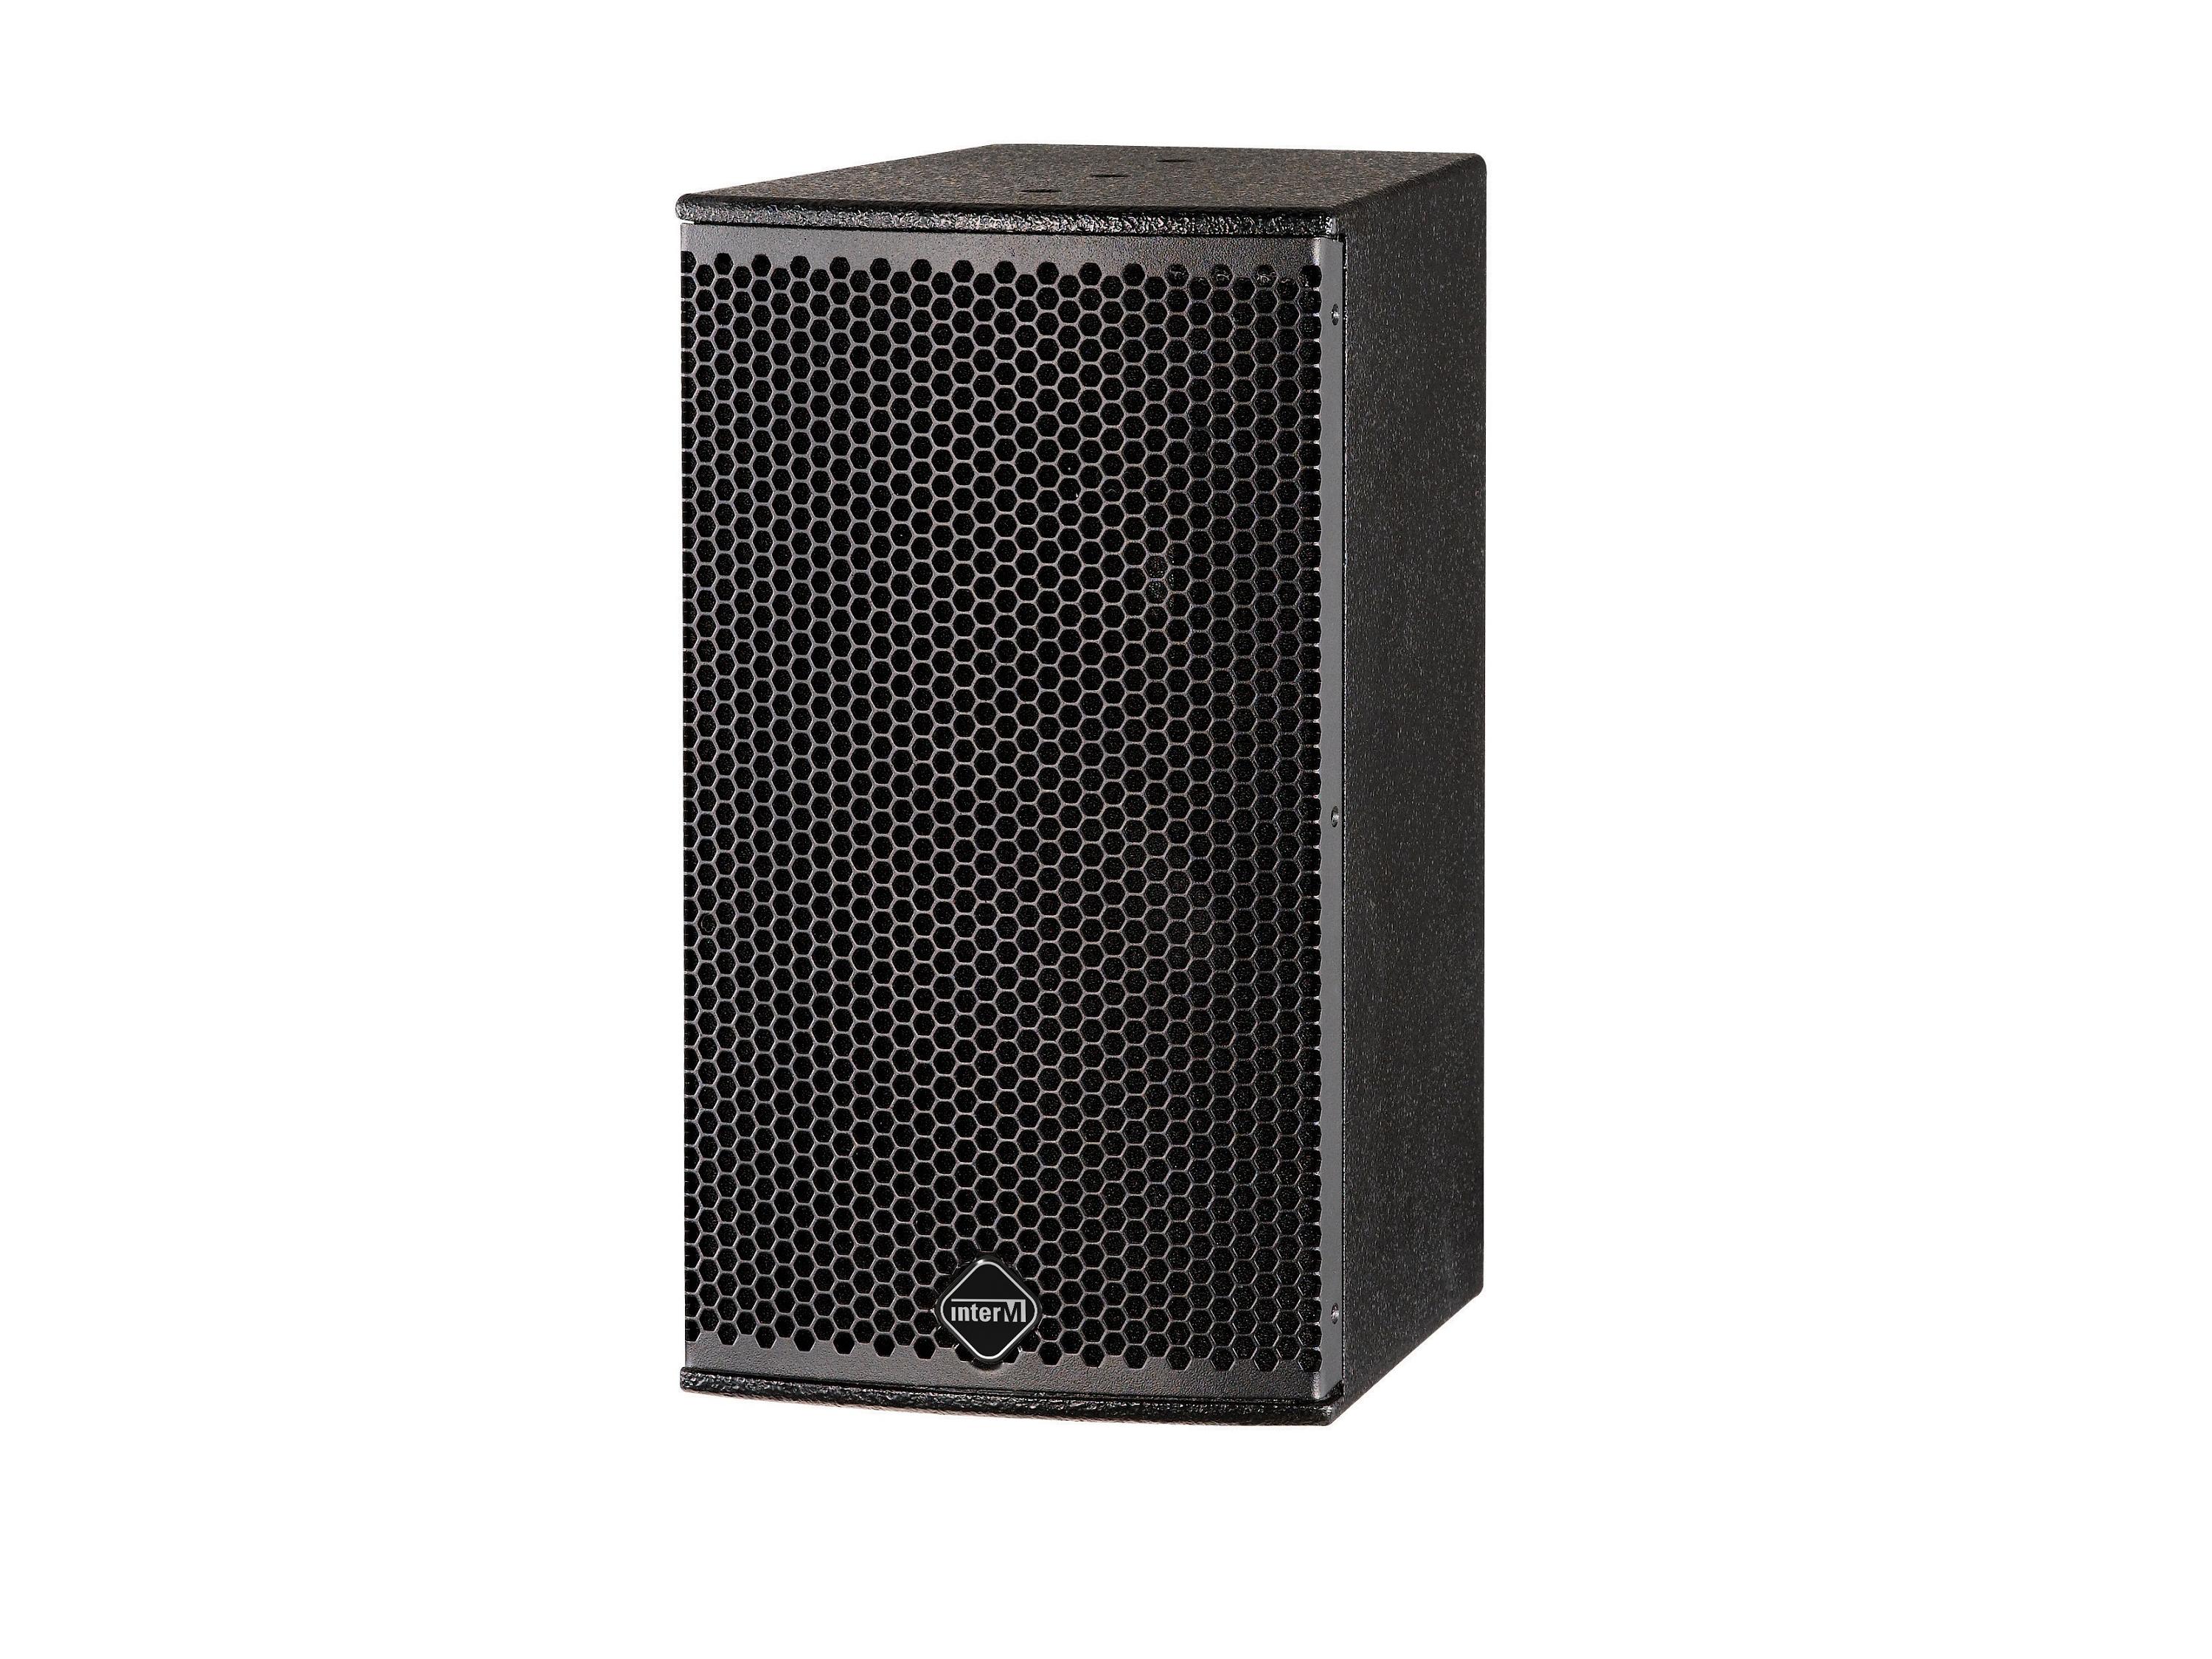 MS-80 5 inch High Quality Compact 2Way Passive Installation Speaker 80W by Inter-M